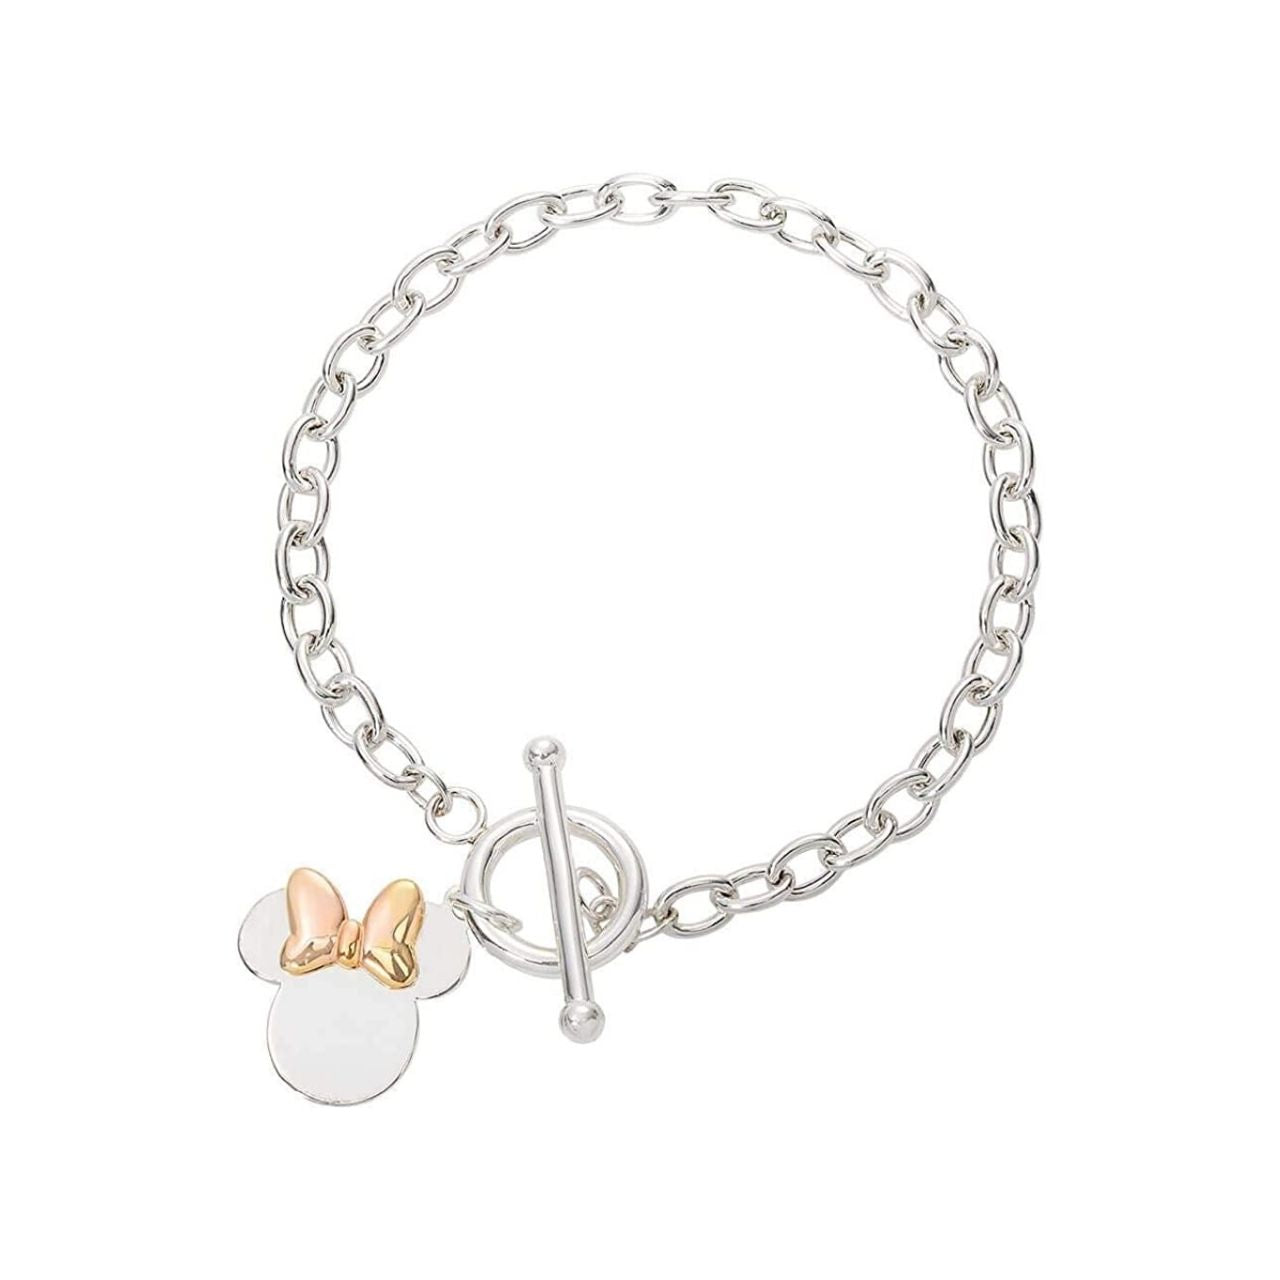 Peers Hardy Disney Minnie Mouse Silver Bracelet with Rose Gold Bow  Stunning sterling silver bracelet feature the Disney Minnie Mouse famous silhouette and is complete with an on trend rose gold coloured bow.  Trendy and fashionable two tone design, the Disney Minnie Mouse Silhouette sterling silver bracelet add a chic, fun touch to any outfit.